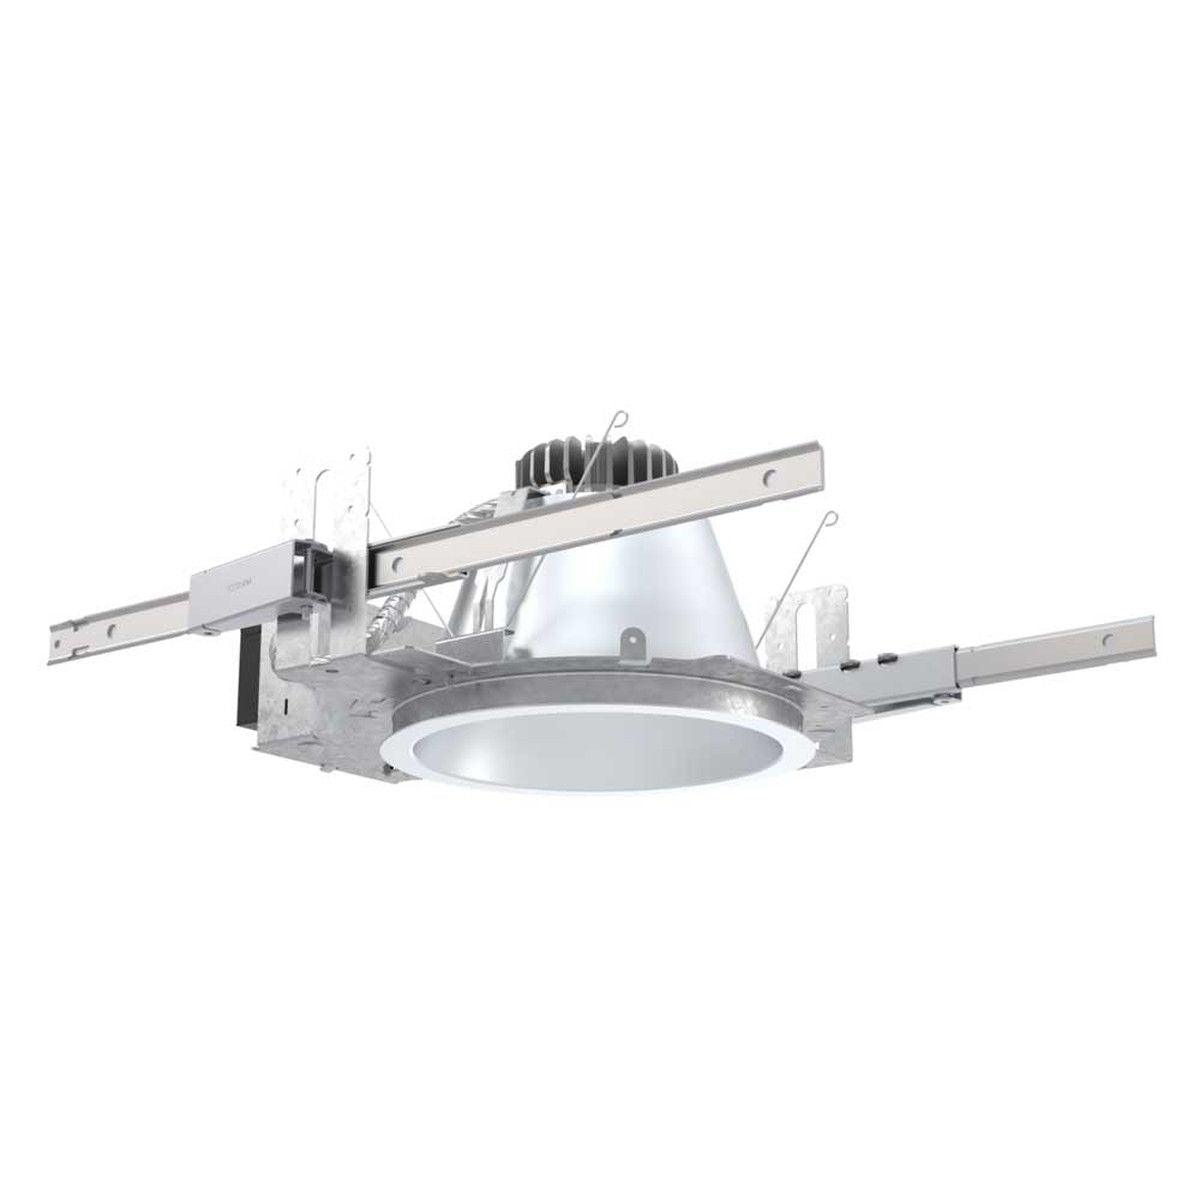 Lithonia LDN8 Commercial LED Recessed Downlight, 3800 Lumens Adjustable, Selectable CCT, 30K/35K/40K/50K, Battery Backup Included (Reflector Sold Separately) - Bees Lighting